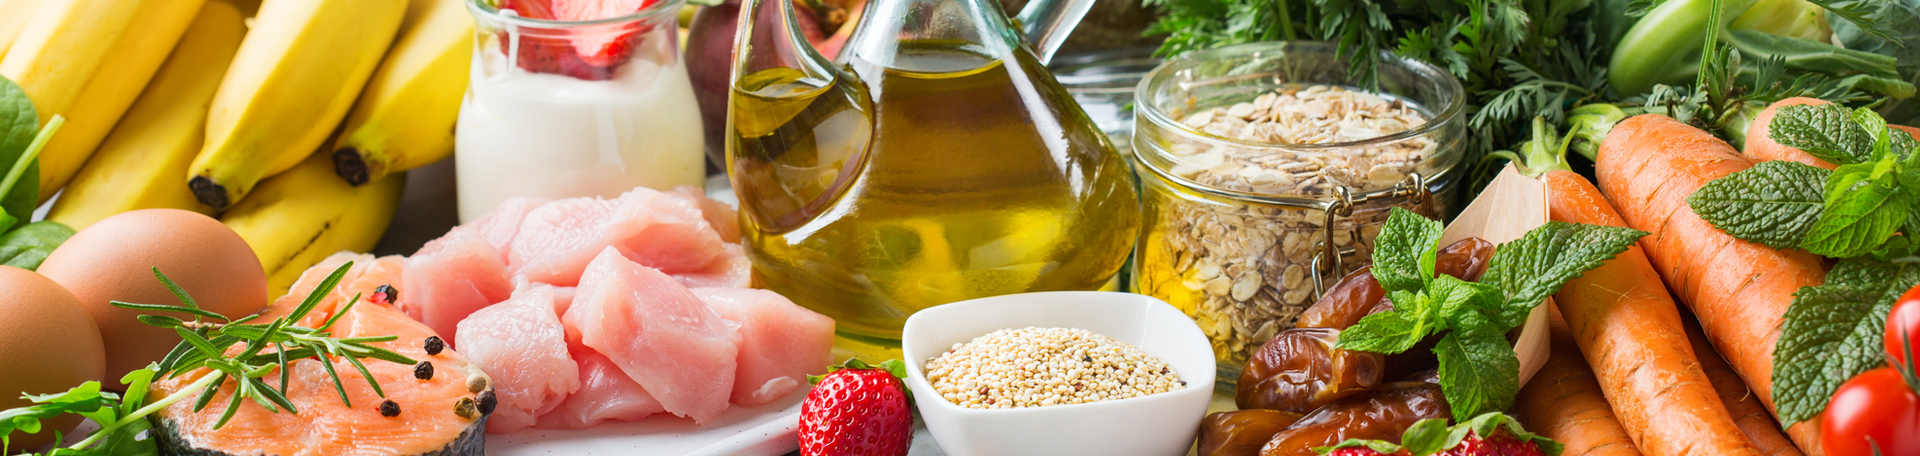 Richmond mediterranean diet good for body and mind, part of Richmond chiropractic treatment plan for some